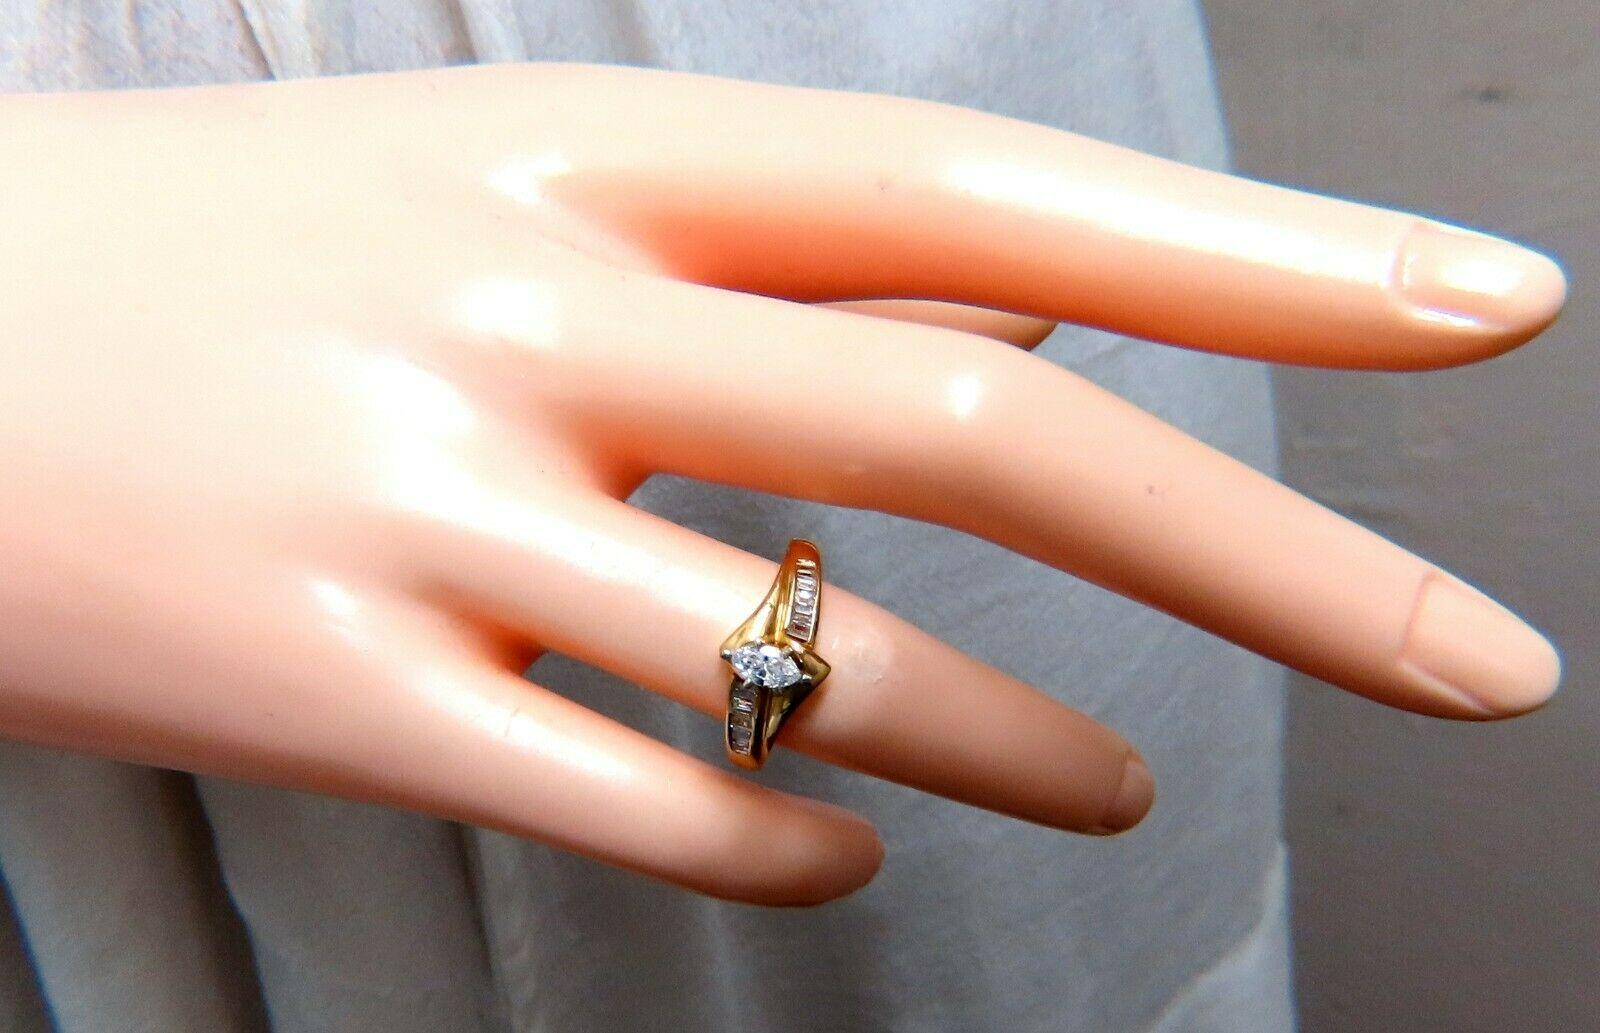 Marquise & Baguette Vintage Ring

.25ct Natural Marquise Cut Diamond 

& .28ct Side Baguettes

Center: 5.5 x 3.2mm

Si-2 clarity G color.

14kt yellow  gold

3.5 Grams

Overall ring: 9.2mm 

Depth: 7.4mm

Current ring size: 6.5

May professionally